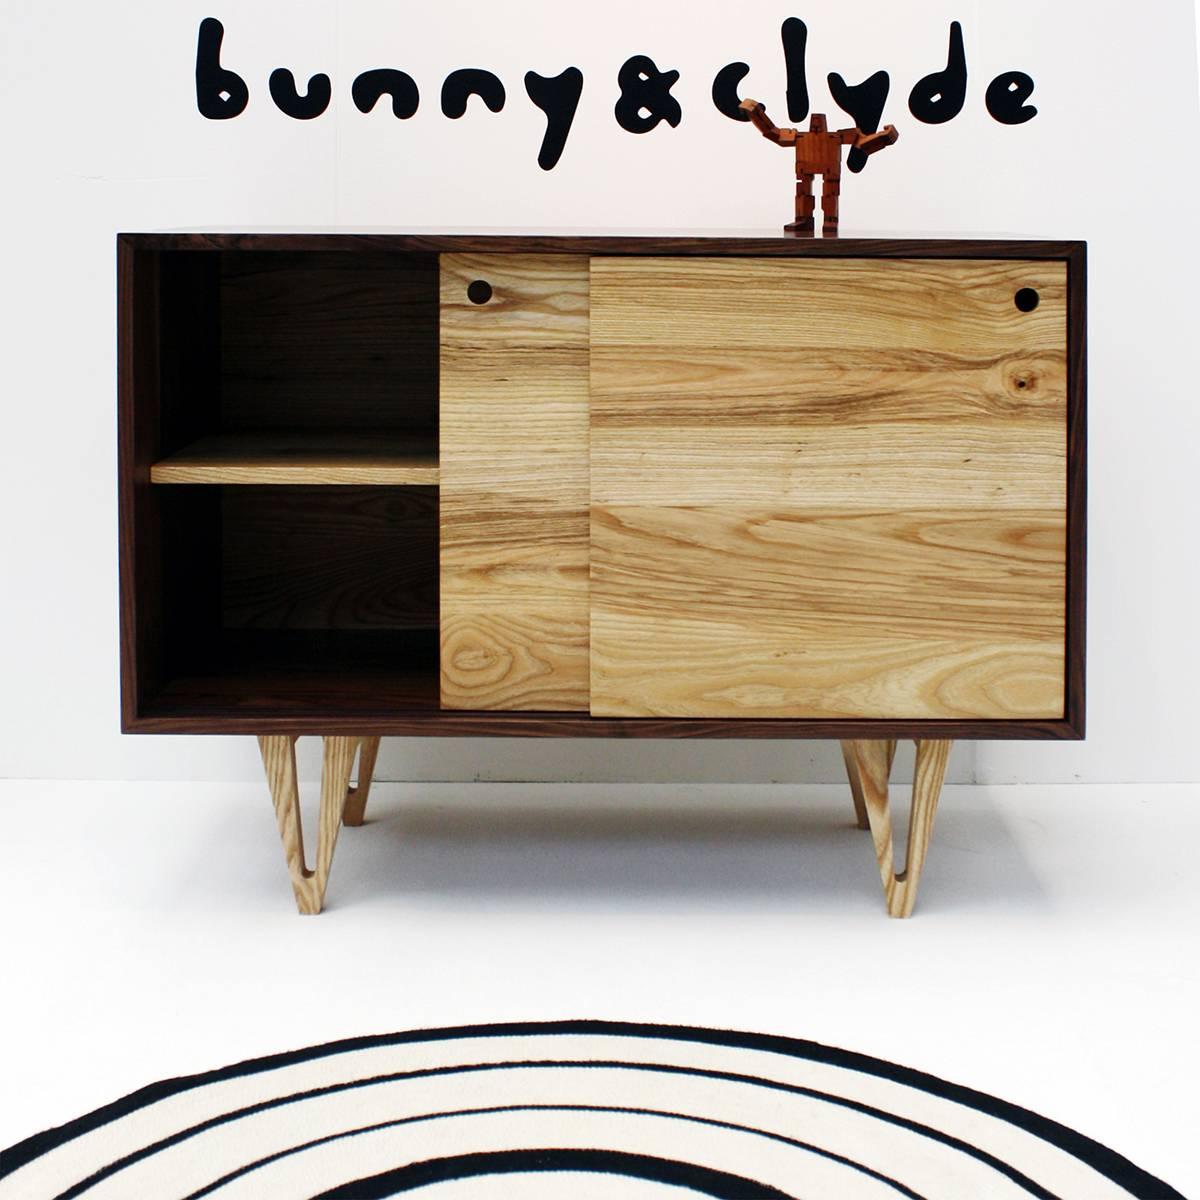 The Harrison dresser is a versatile dresser and cabinet in the style of Mid-Century Modern design.  Designed by Irish / South African brand Bunny & Clyde in 2013, the Harrison Dresser is hand crafted in Ireland by a 6th generation family woodworking